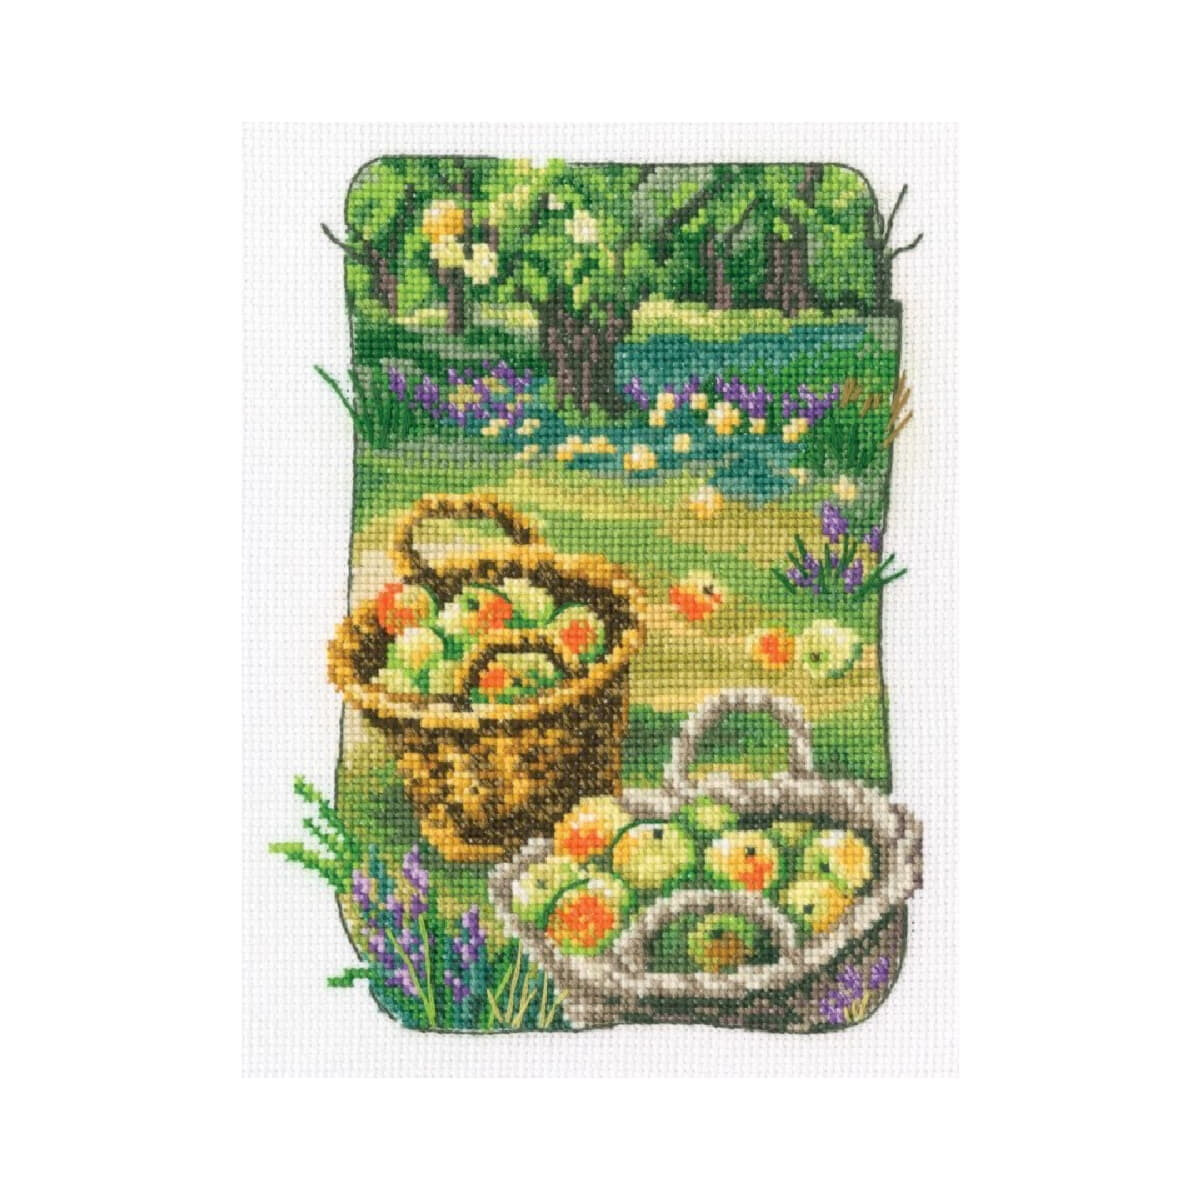 RTO counted cross stitch kit "Grandmothers old...